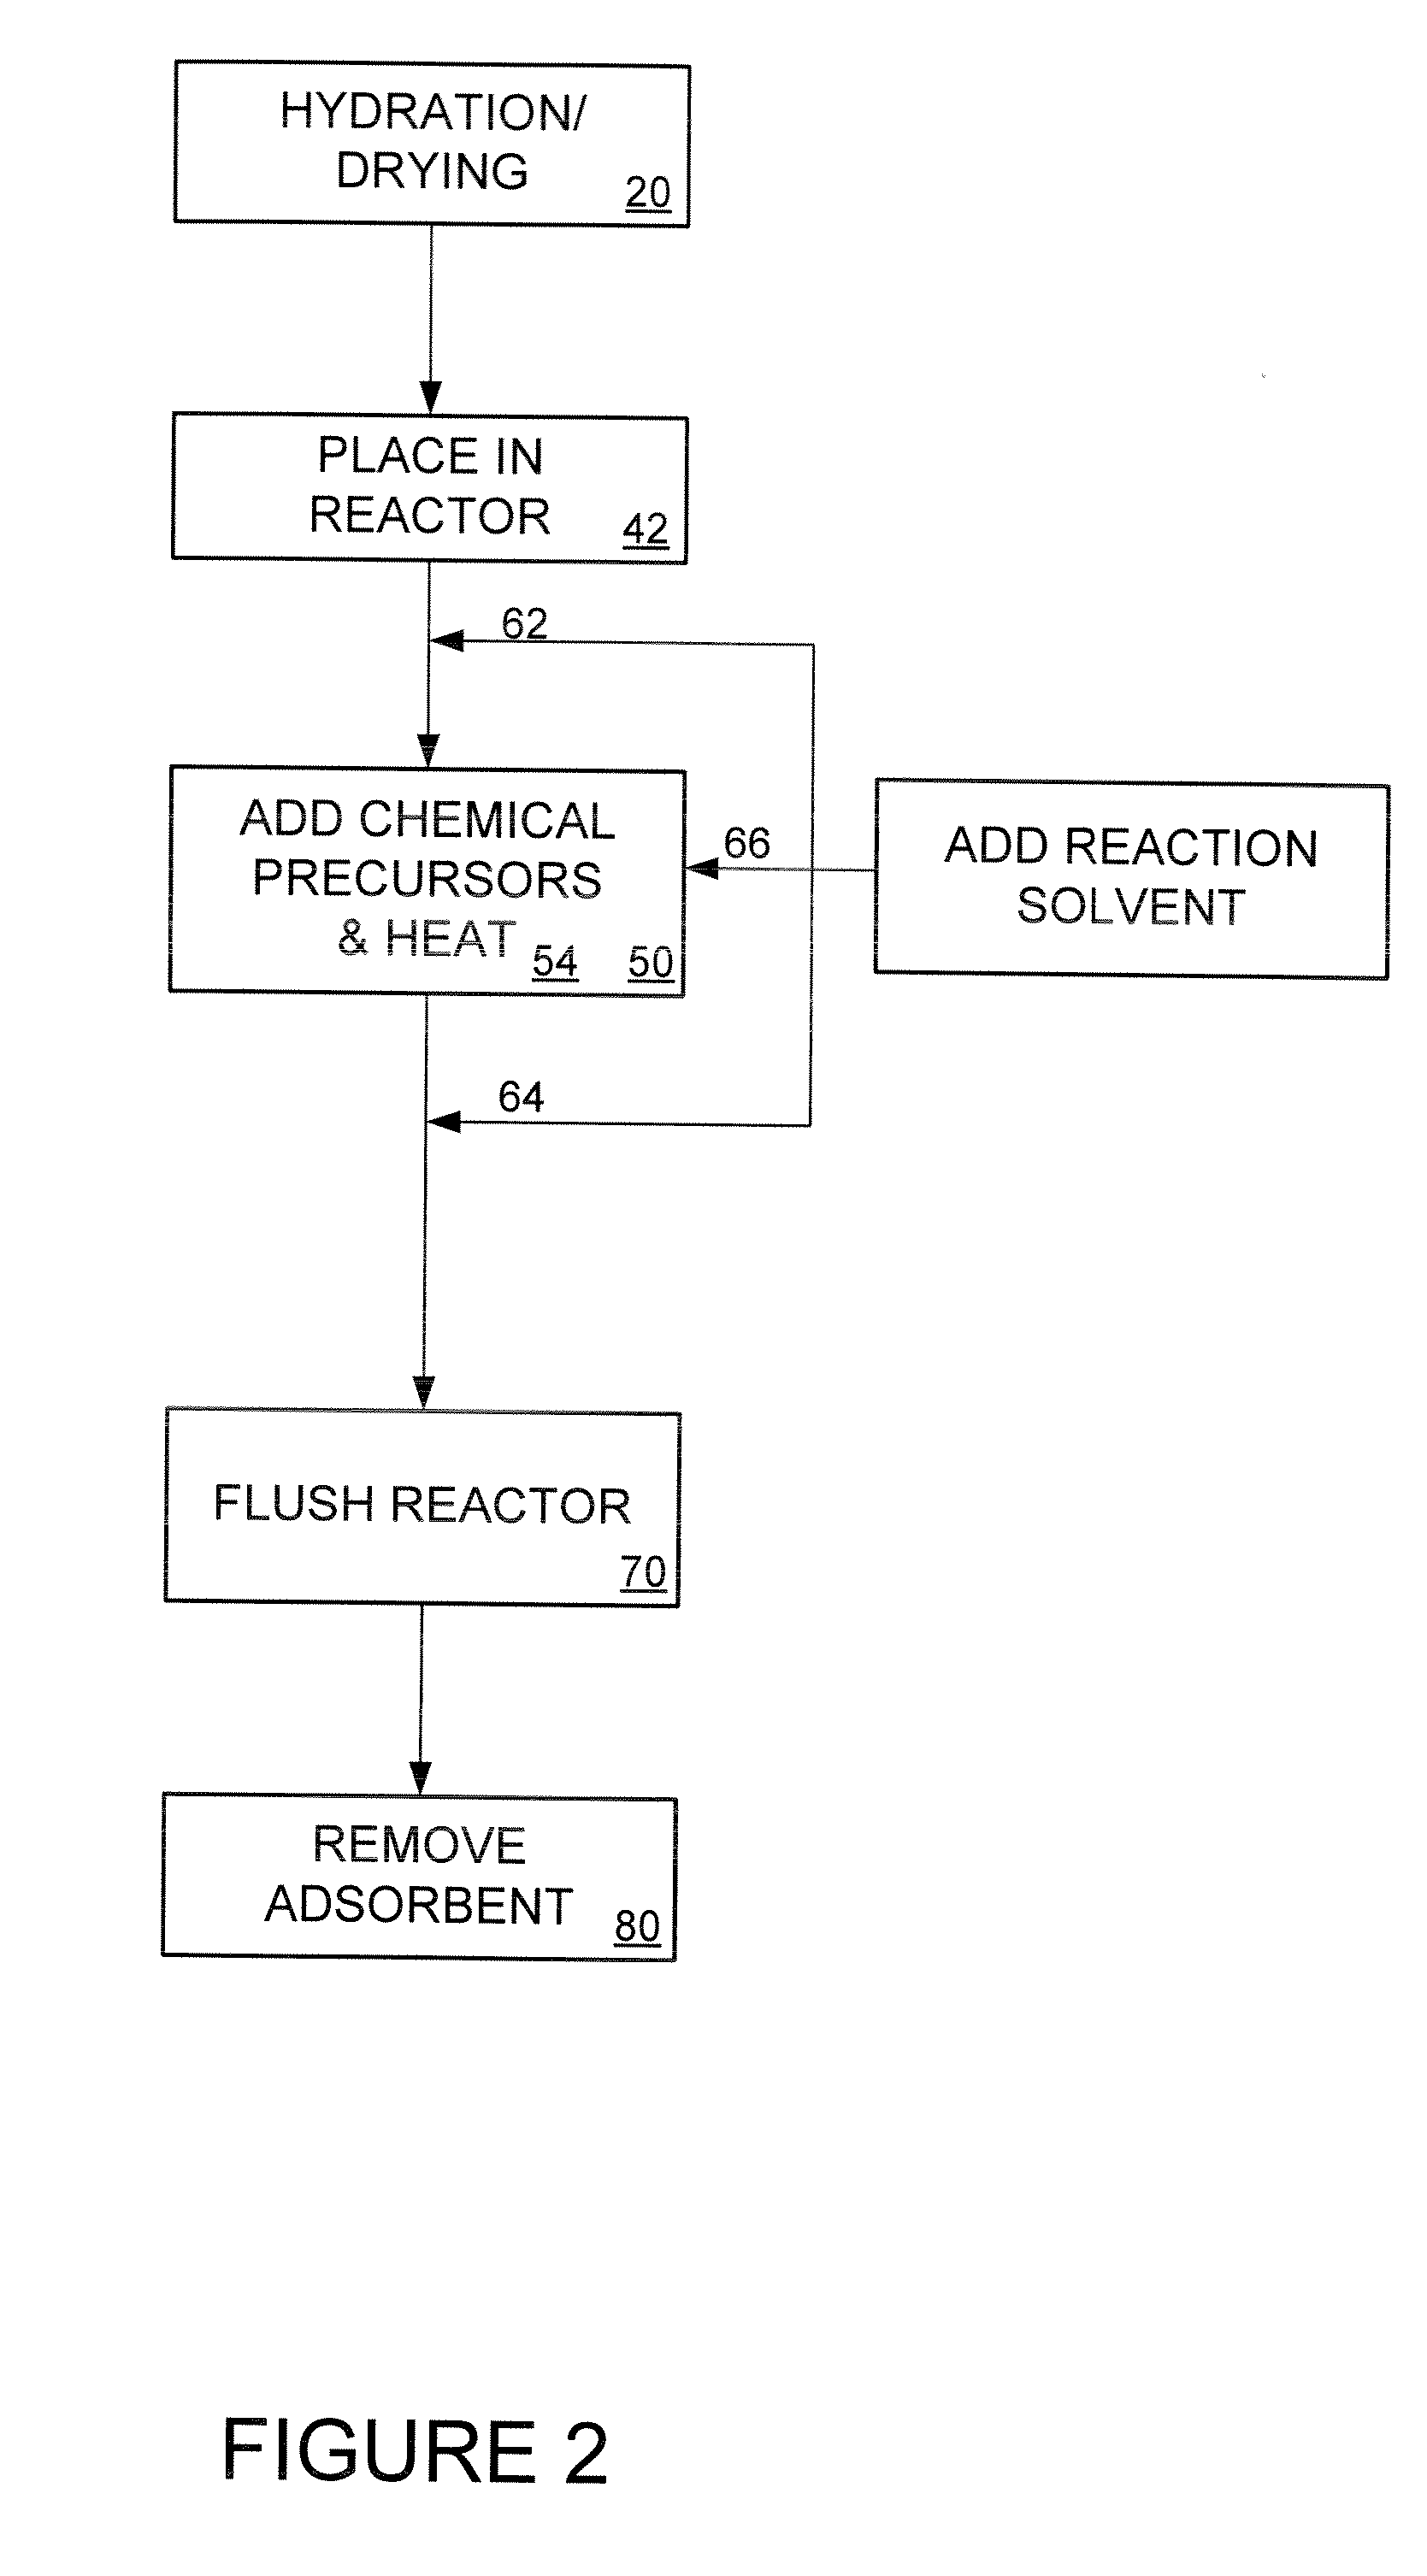 Adsorbent composition and method of making same